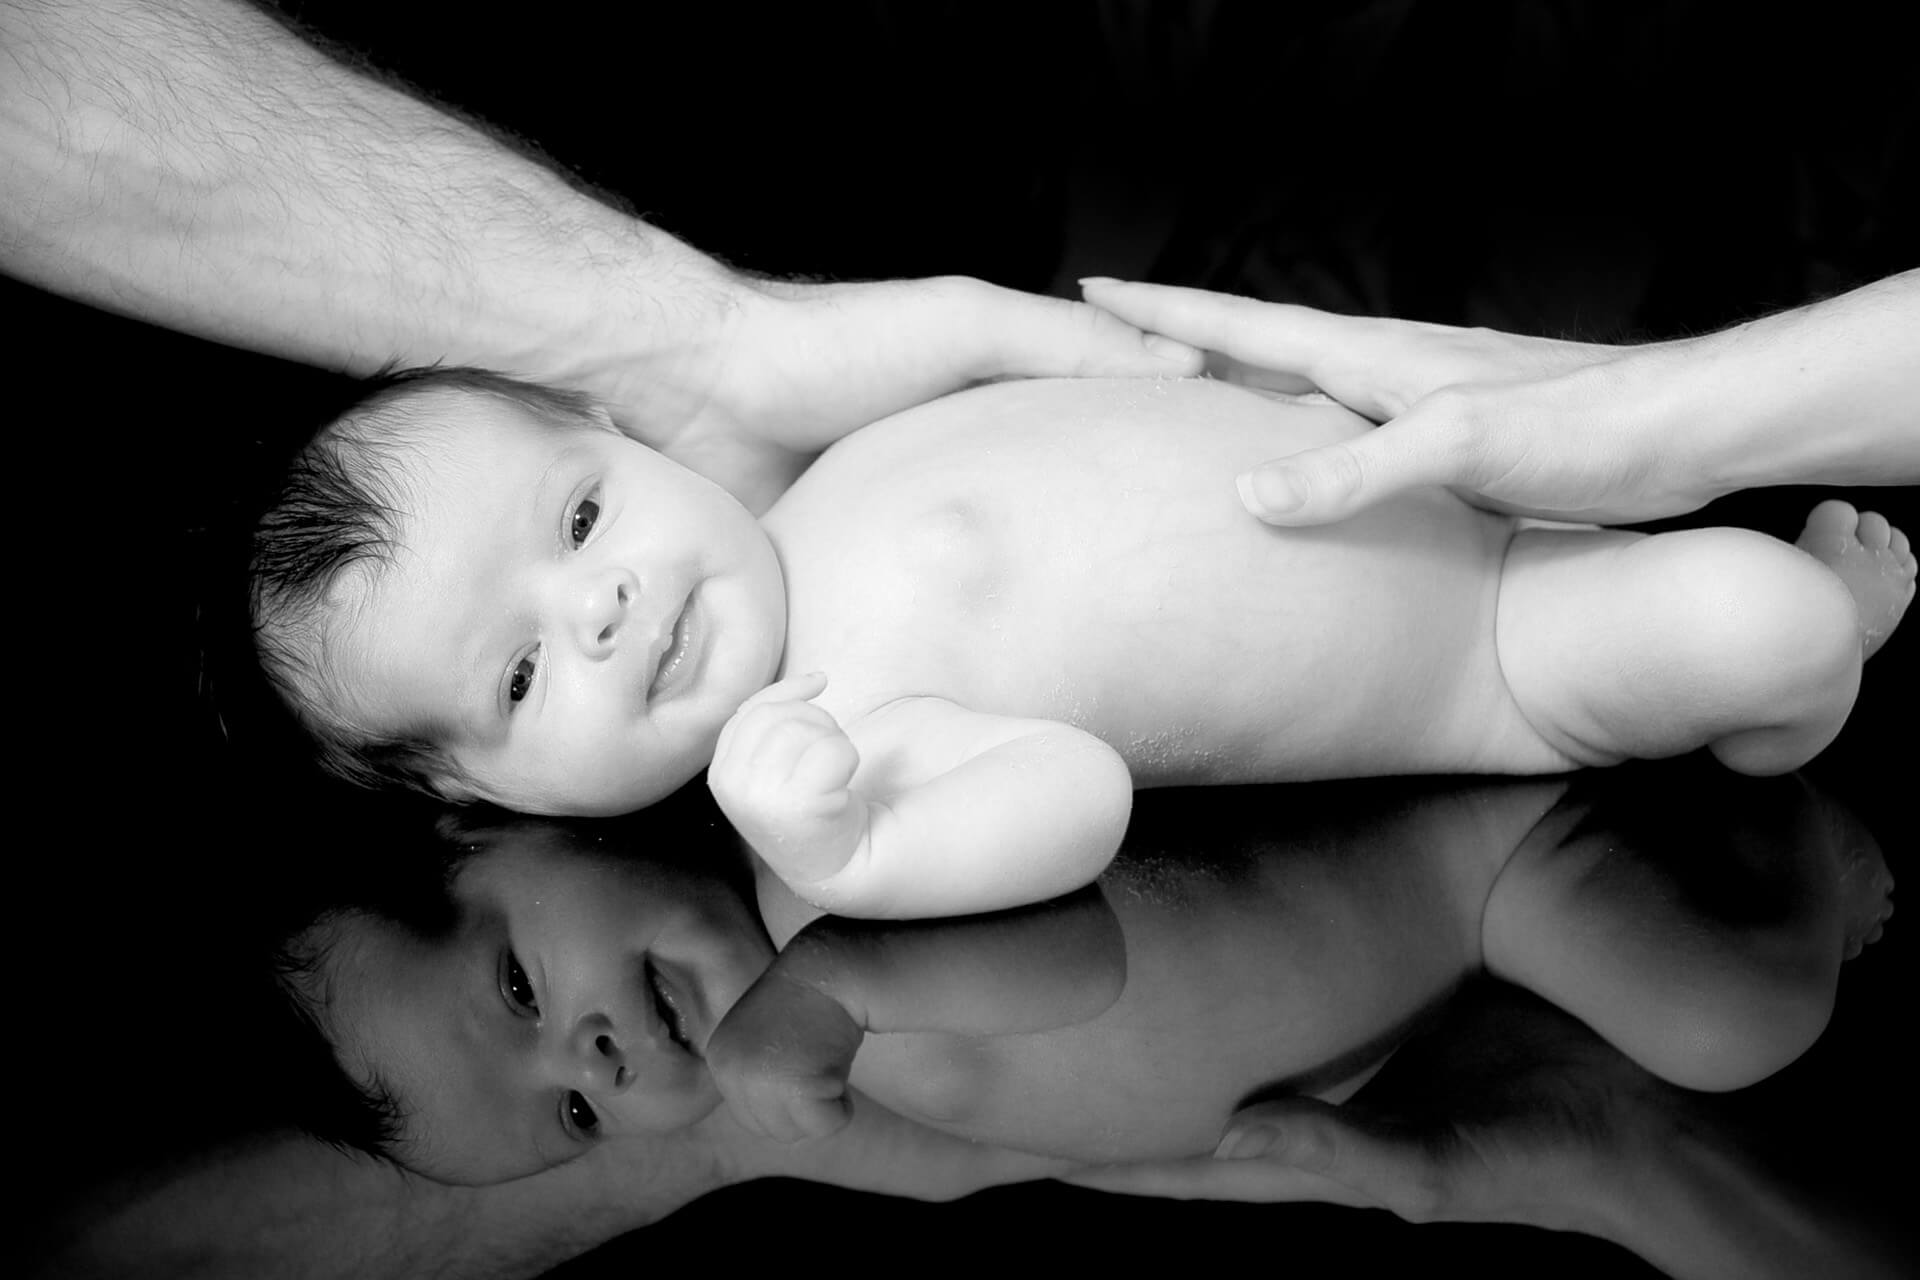 Best Detroit baby photographer takes candid newborn photos with the baby's parents is reflected during this infant photography session in metro Detroit, Michigan.